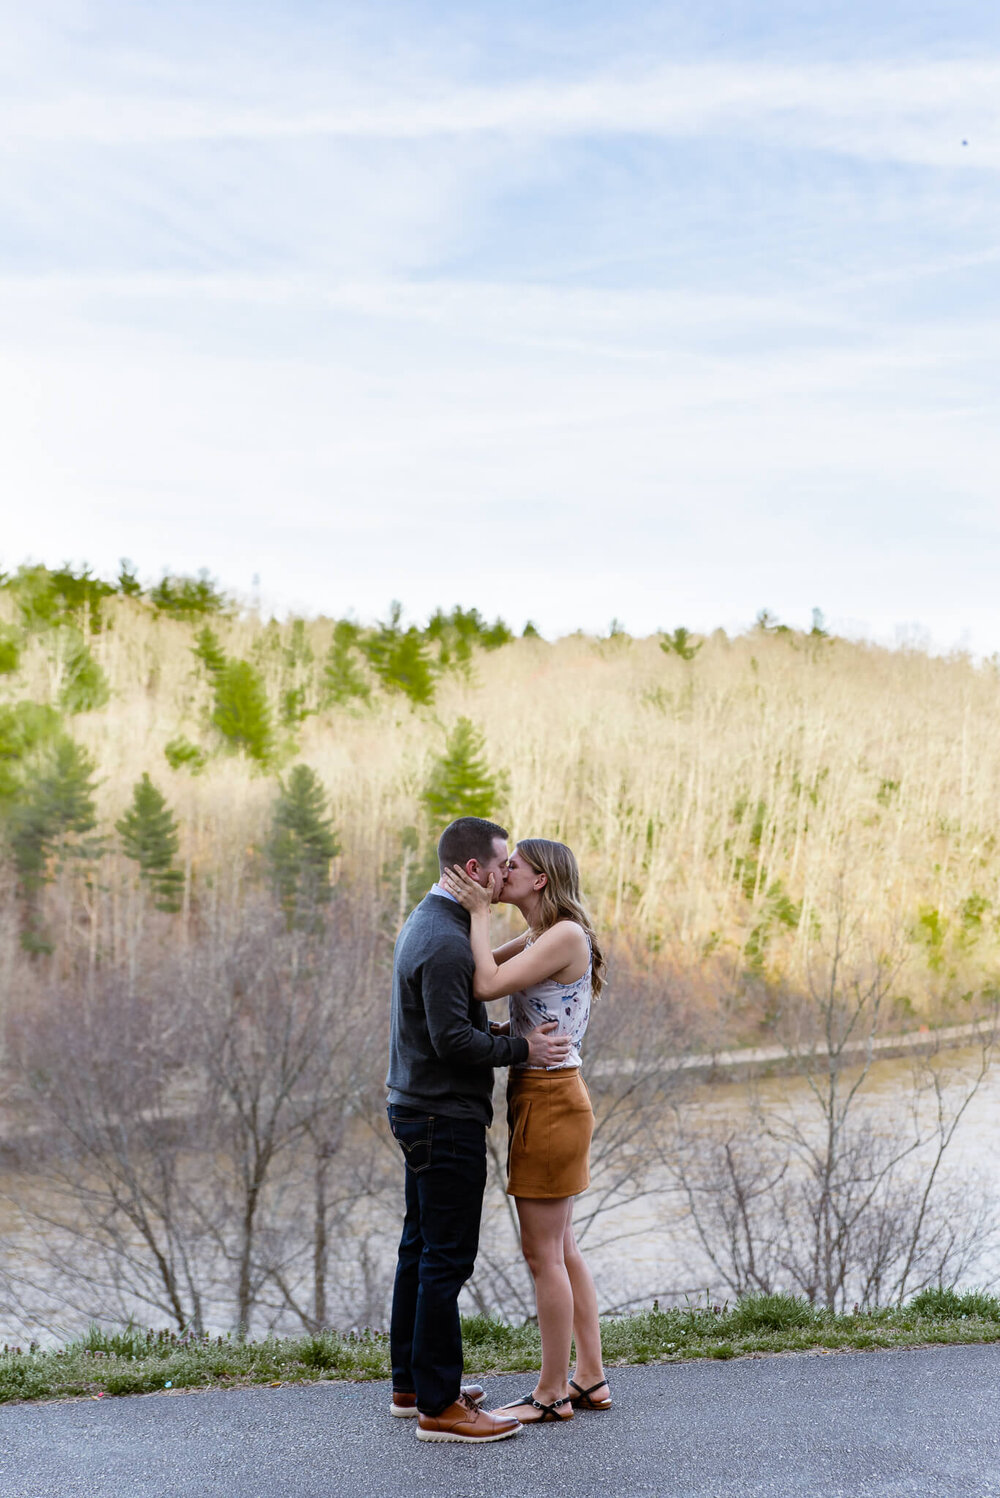 Surprise Proposal at the Botanical Gardens at Asheville by Asheville Wedding Photographer Nick Levine Photography